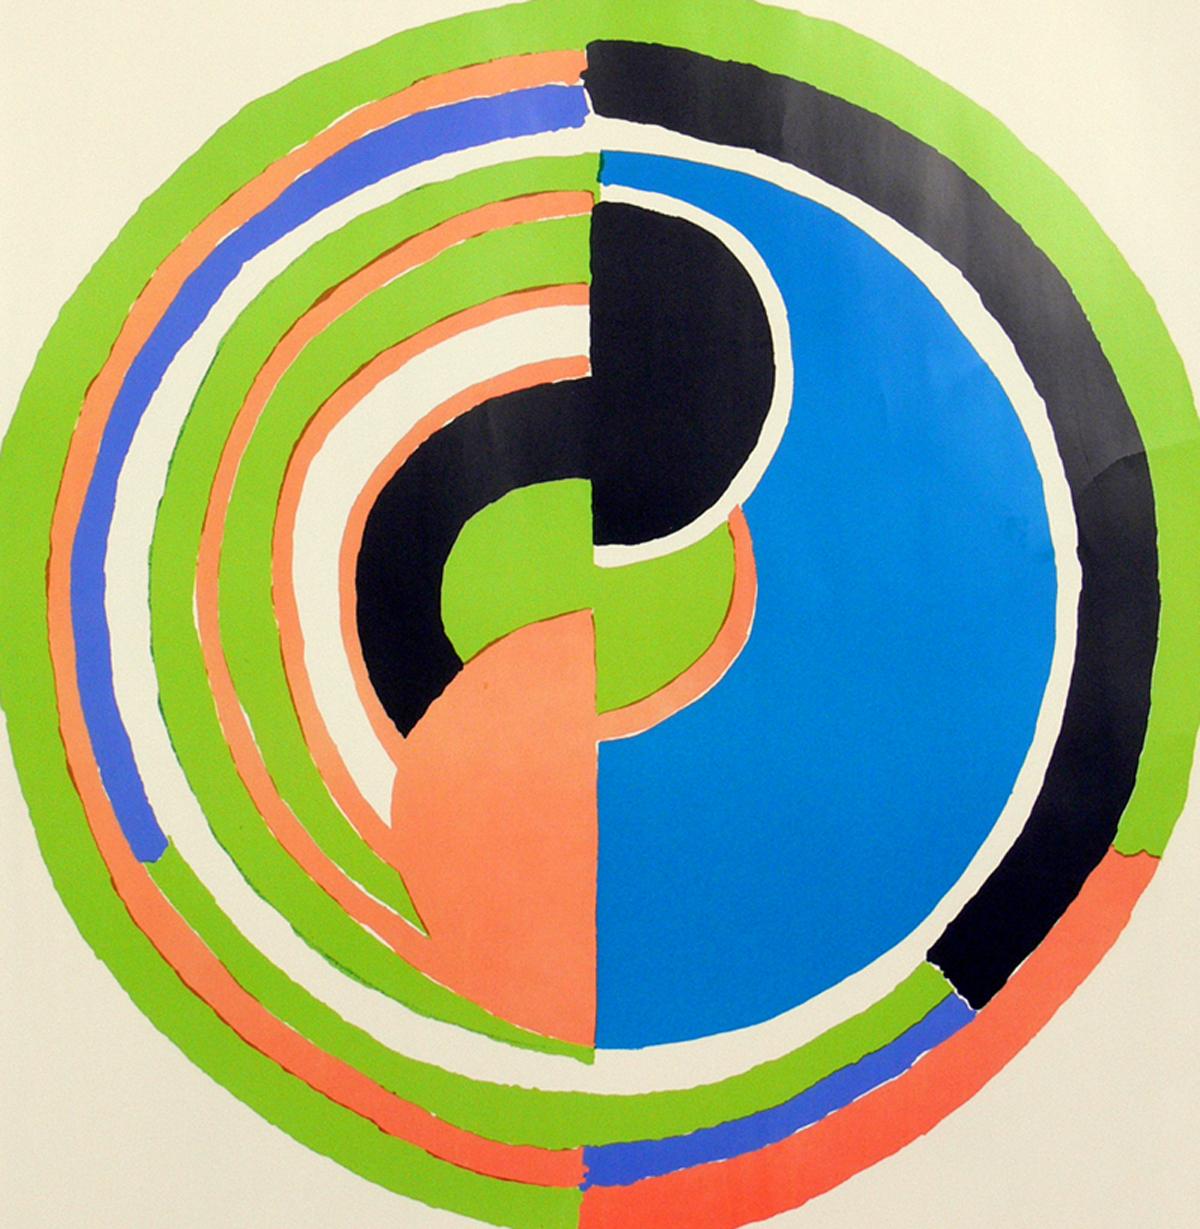 Colorful Modernist Lithograph by Sonia Delaunay, France, circa 1960s. It has been recently framed in a clean lined black lacquer gallery frame.